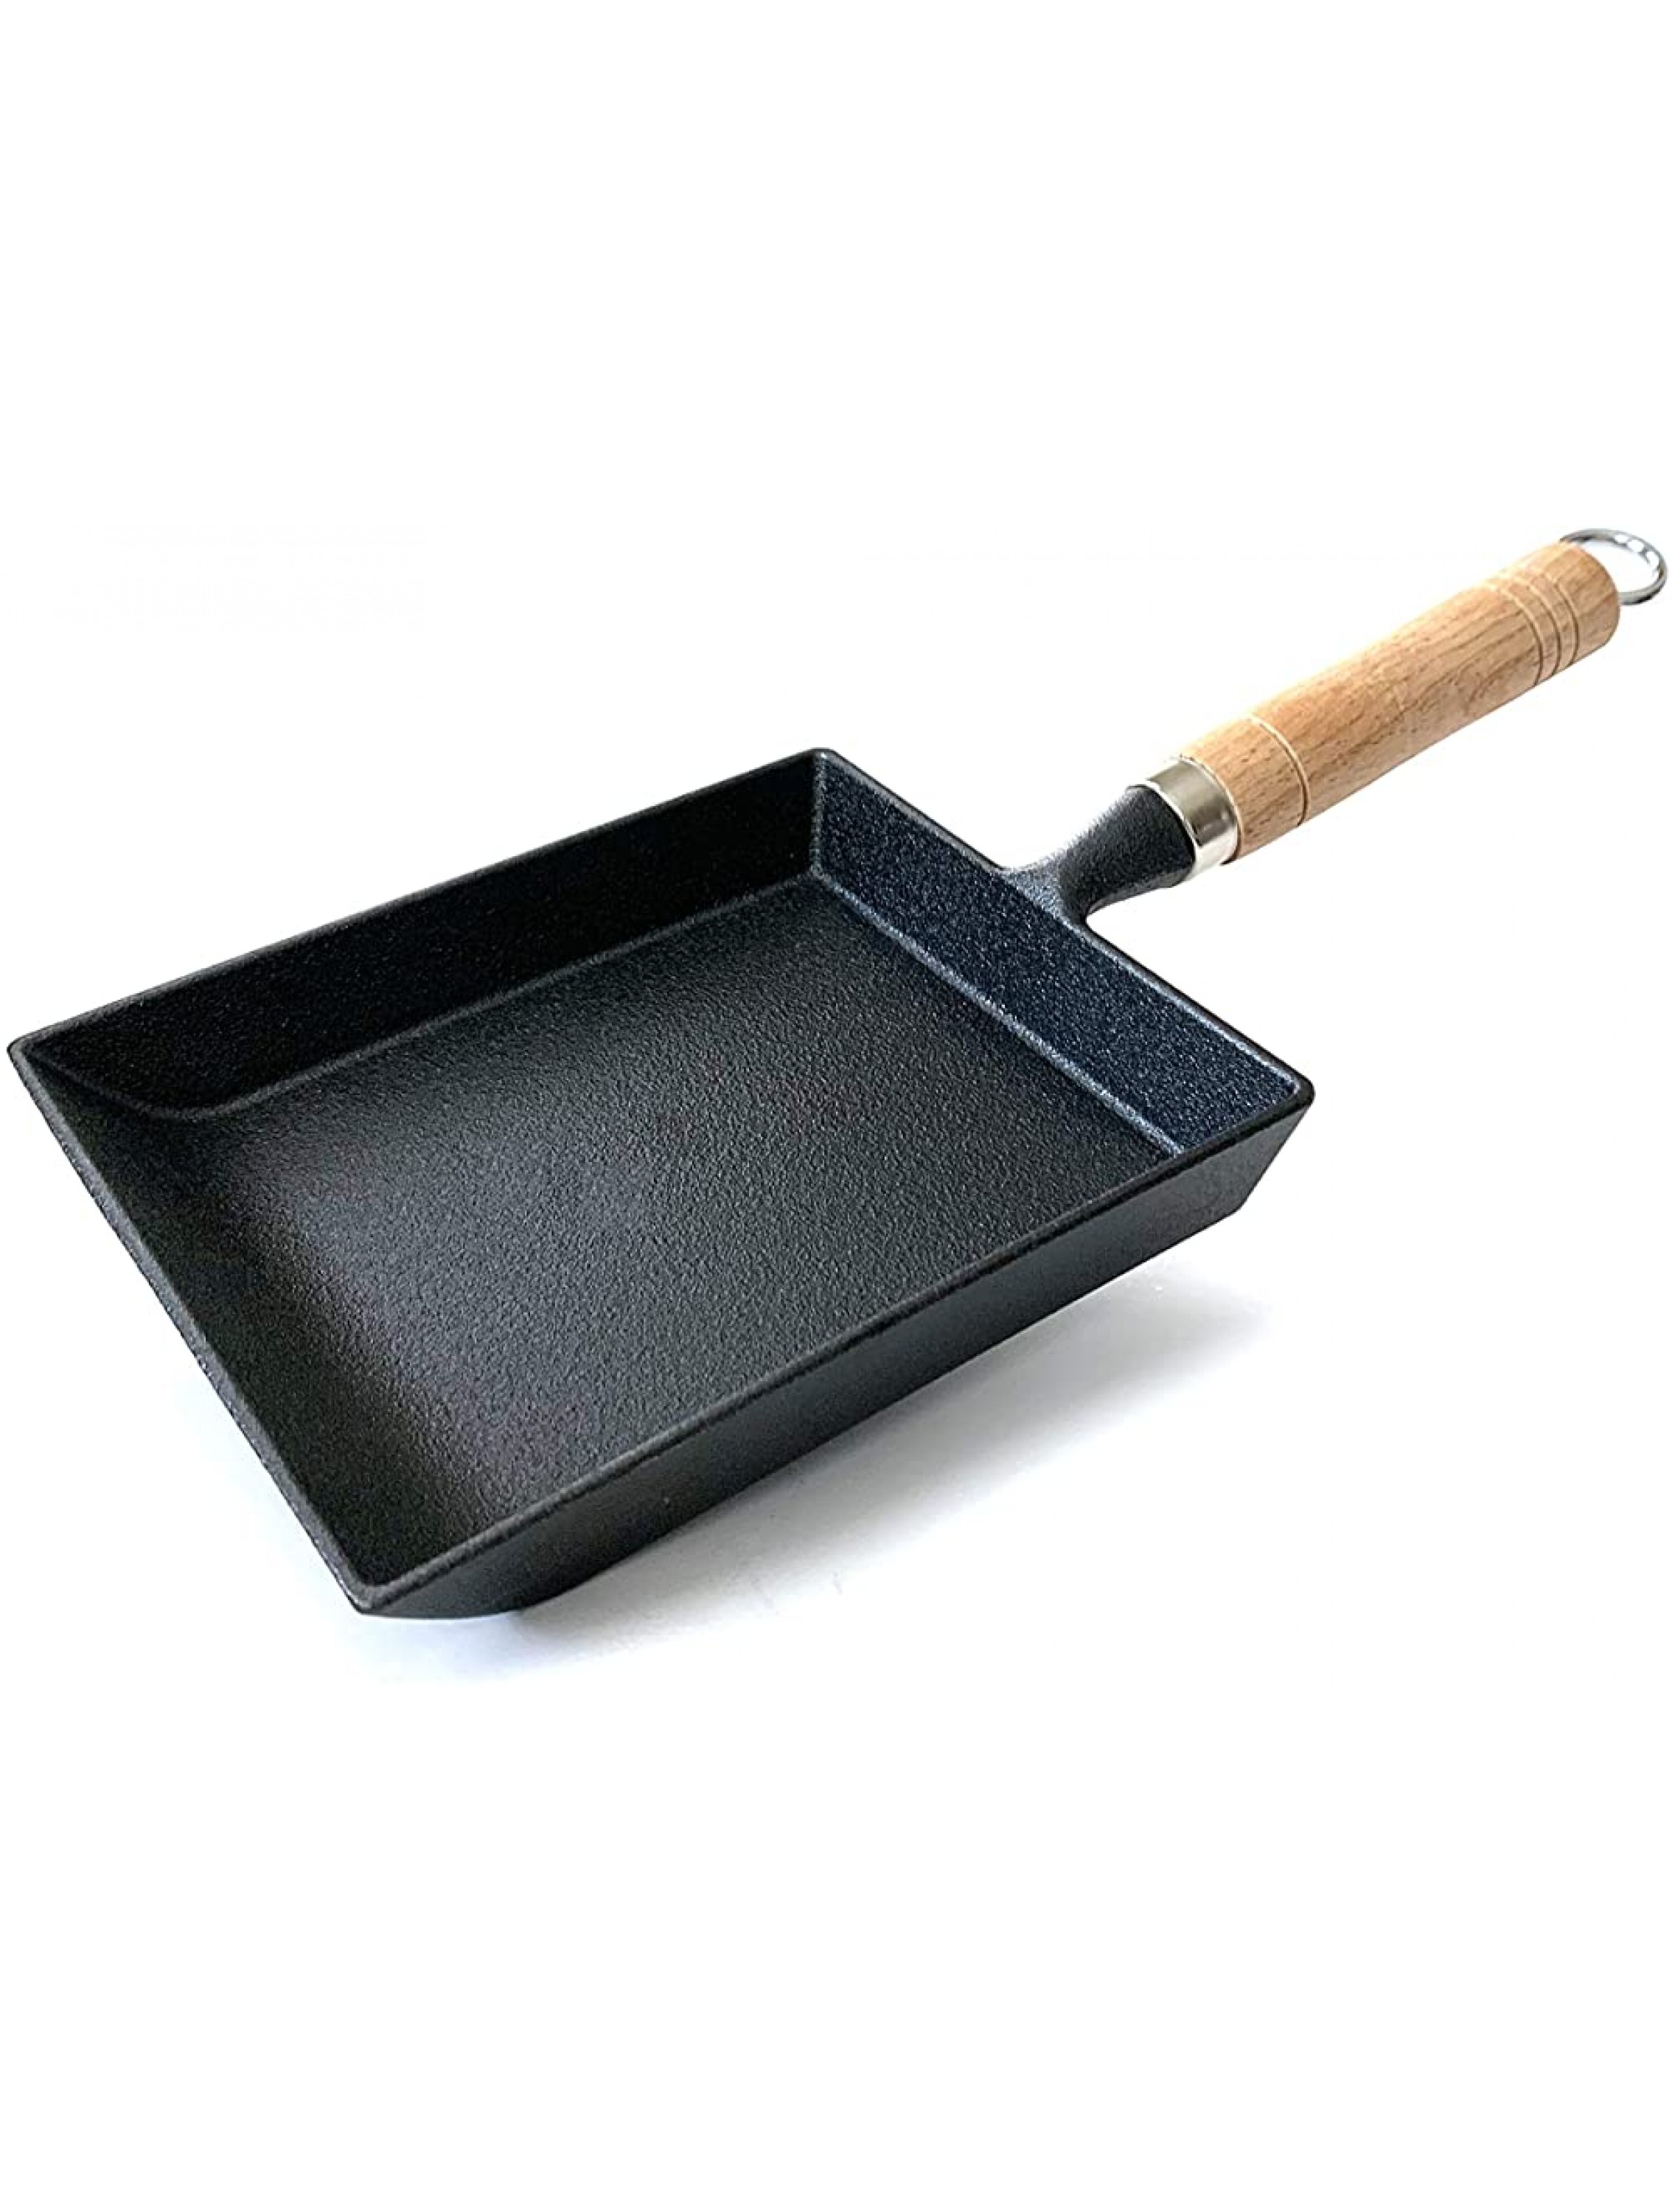 Kasian House Cast Iron Japanese Tamagoyaki Omelet Pan with Wooden Handle Traditional Rectangular Pre-Seasoned Cast Iron Pan for Rolled Egg Omelet - BR47ZG84Z